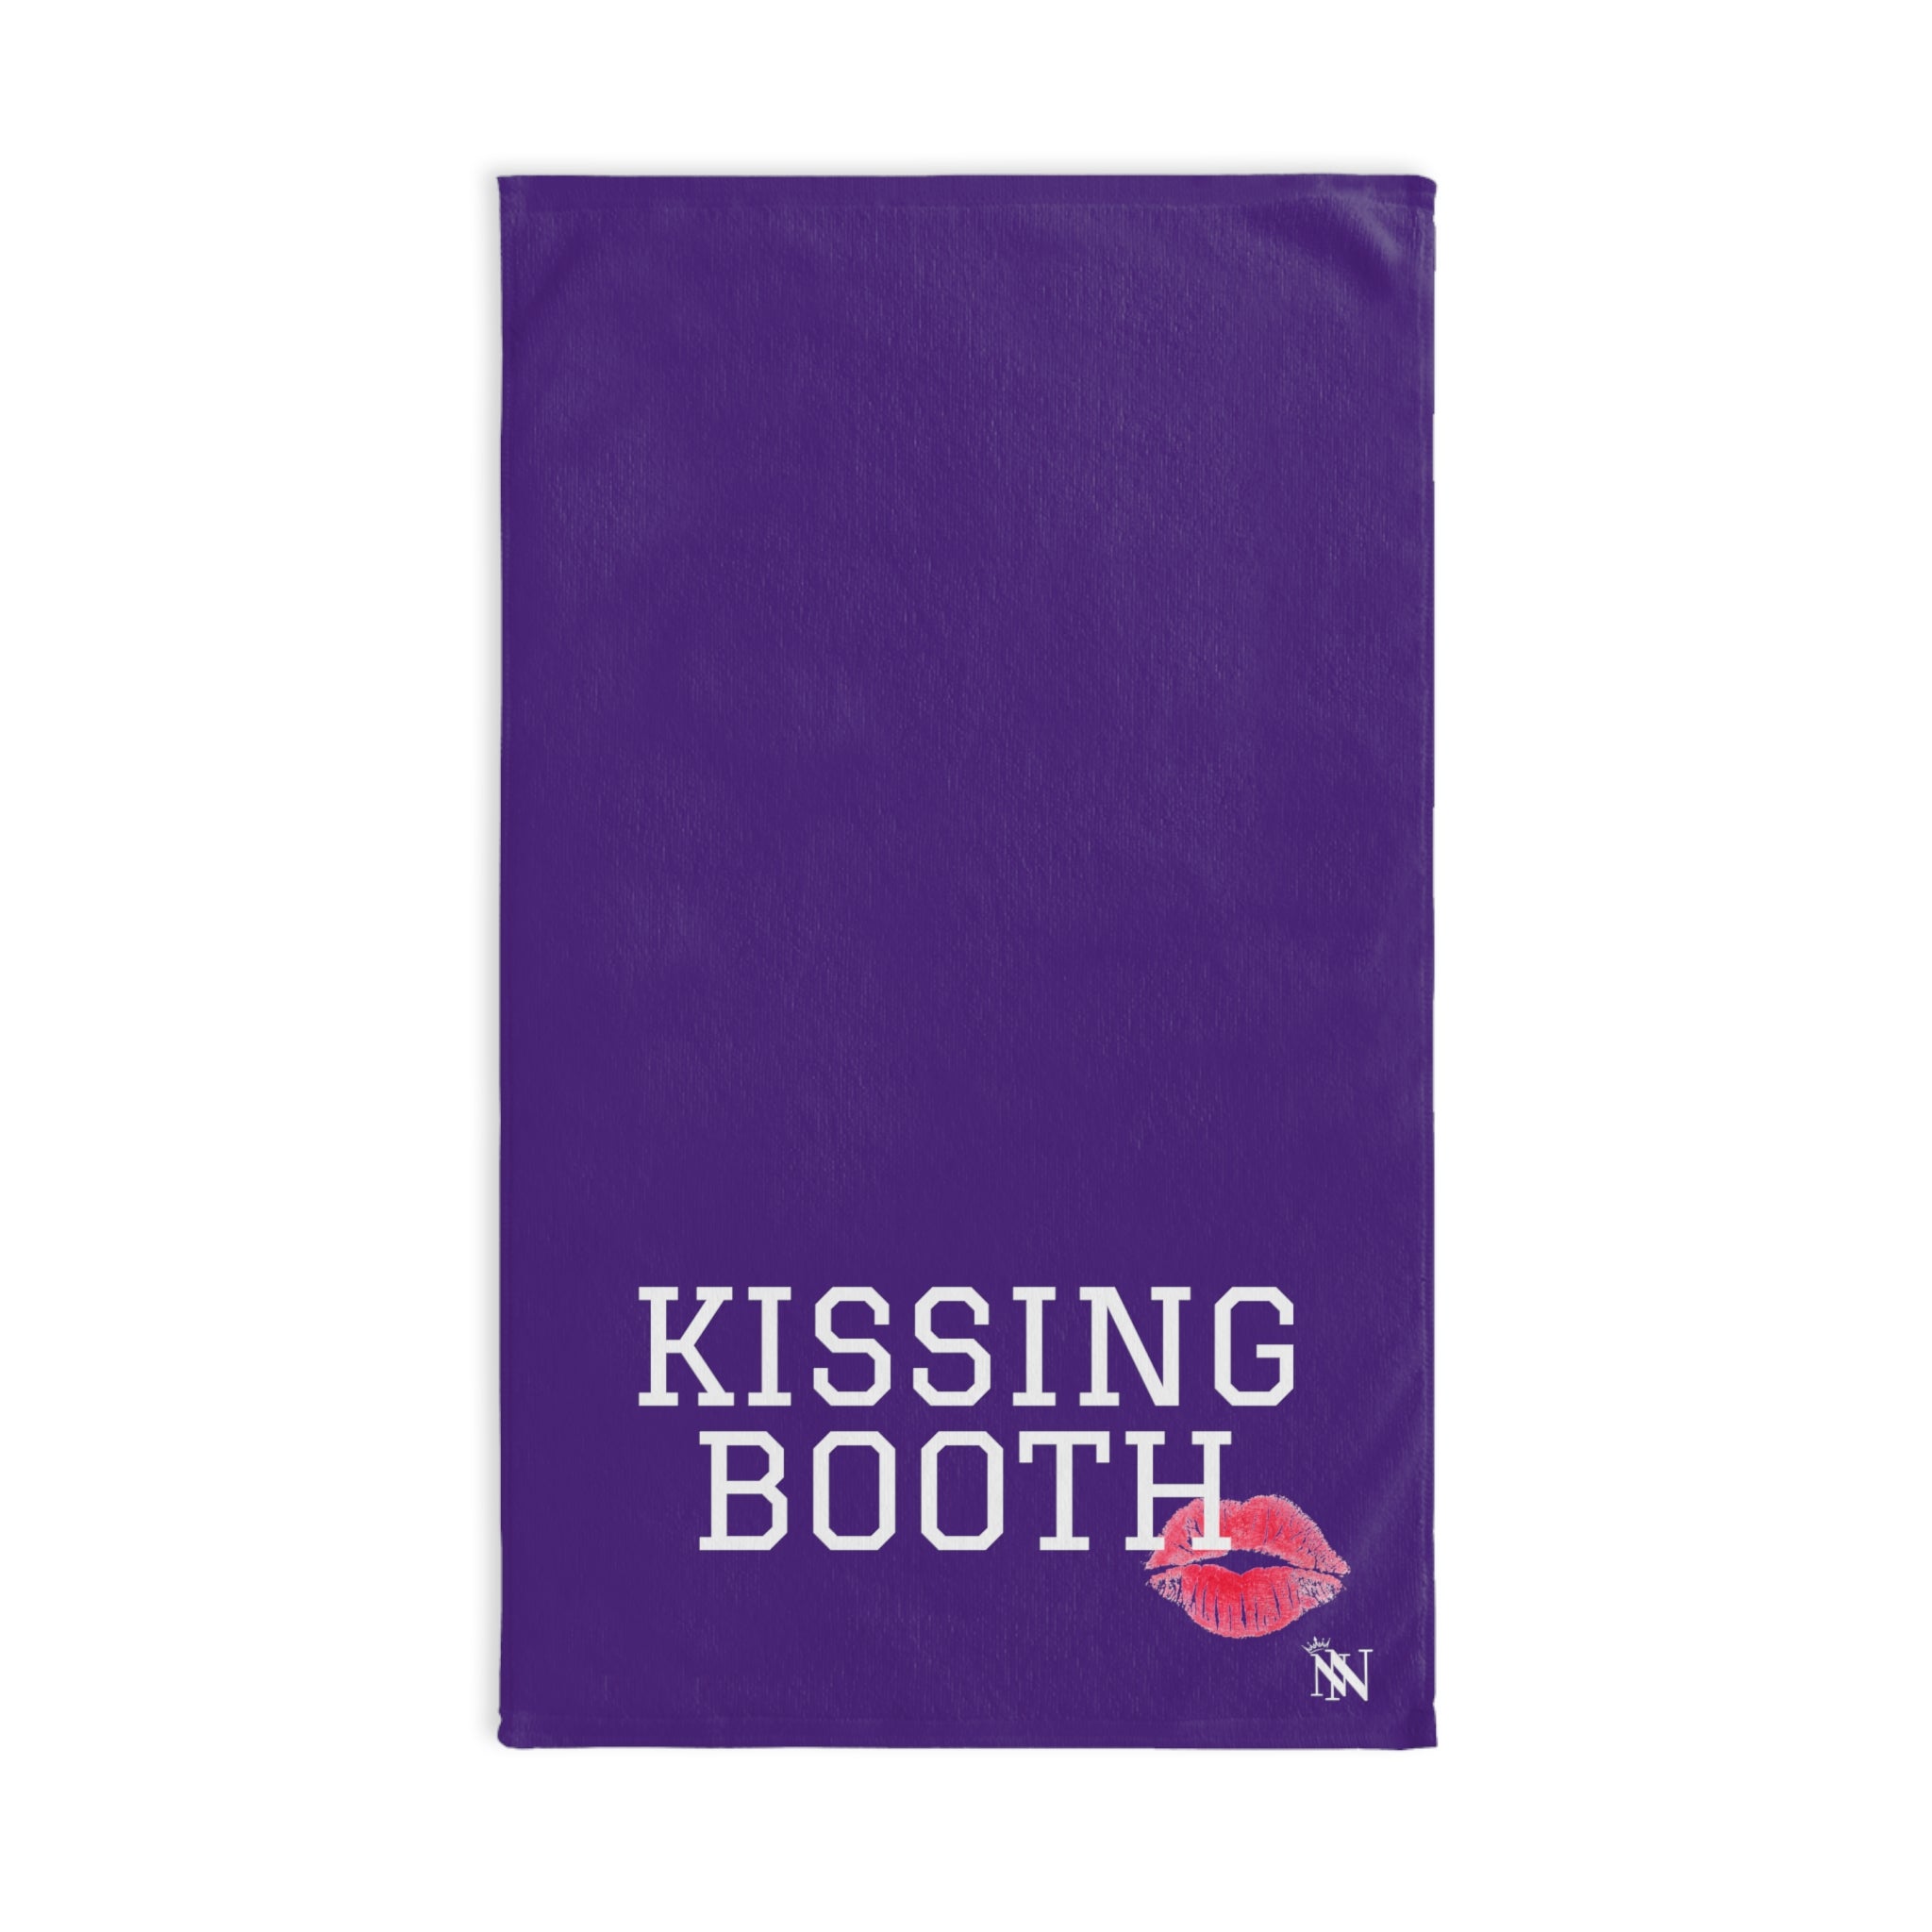 Lips Booth Kiss Purple | Funny Gifts for Men - Gifts for Him - Birthday Gifts for Men, Him, Husband, Boyfriend, New Couple Gifts, Fathers & Valentines Day Gifts, Christmas Gifts NECTAR NAPKINS